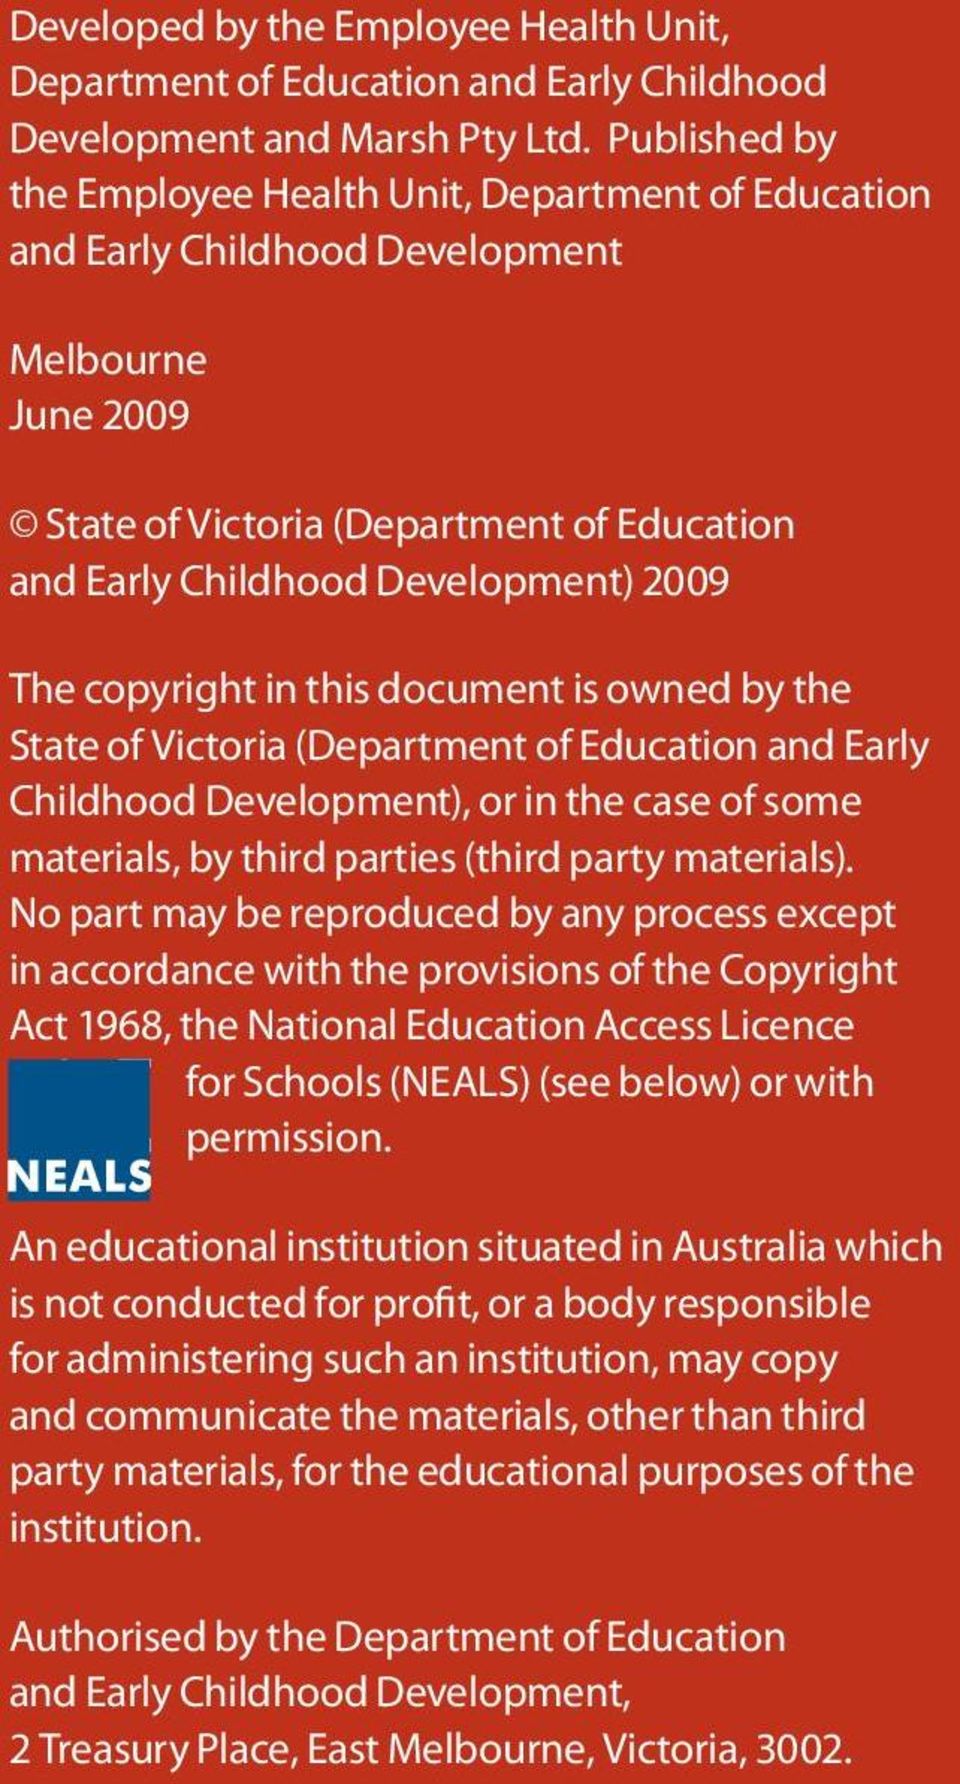 copyright in this document is owned by the State of Victoria (Department of Education and Early Childhood Development), or in the case of some materials, by third parties (third party materials).